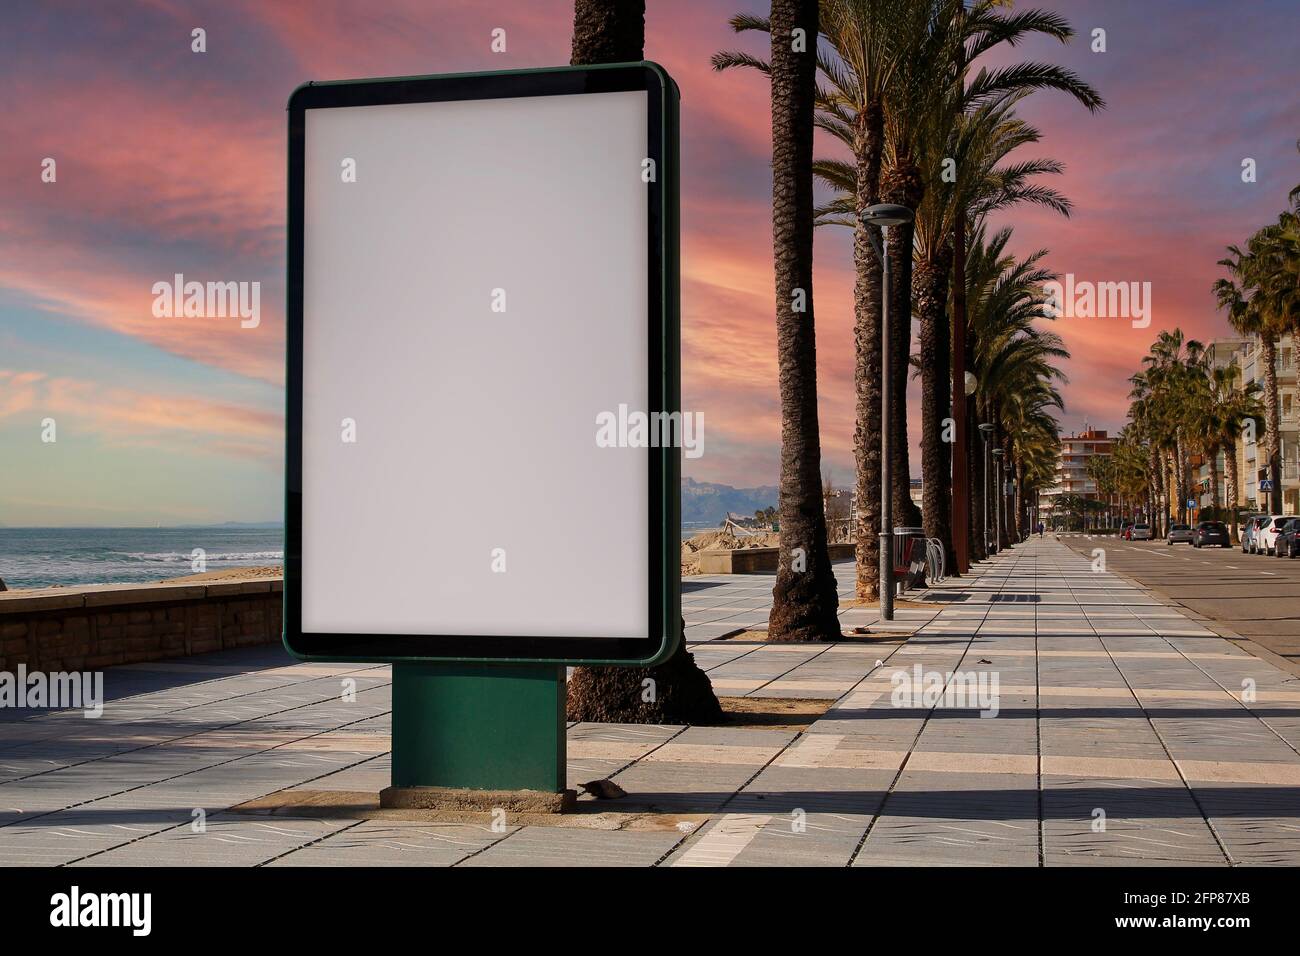 Blank billboard mock up outdoors, for advertisement Stock Photo